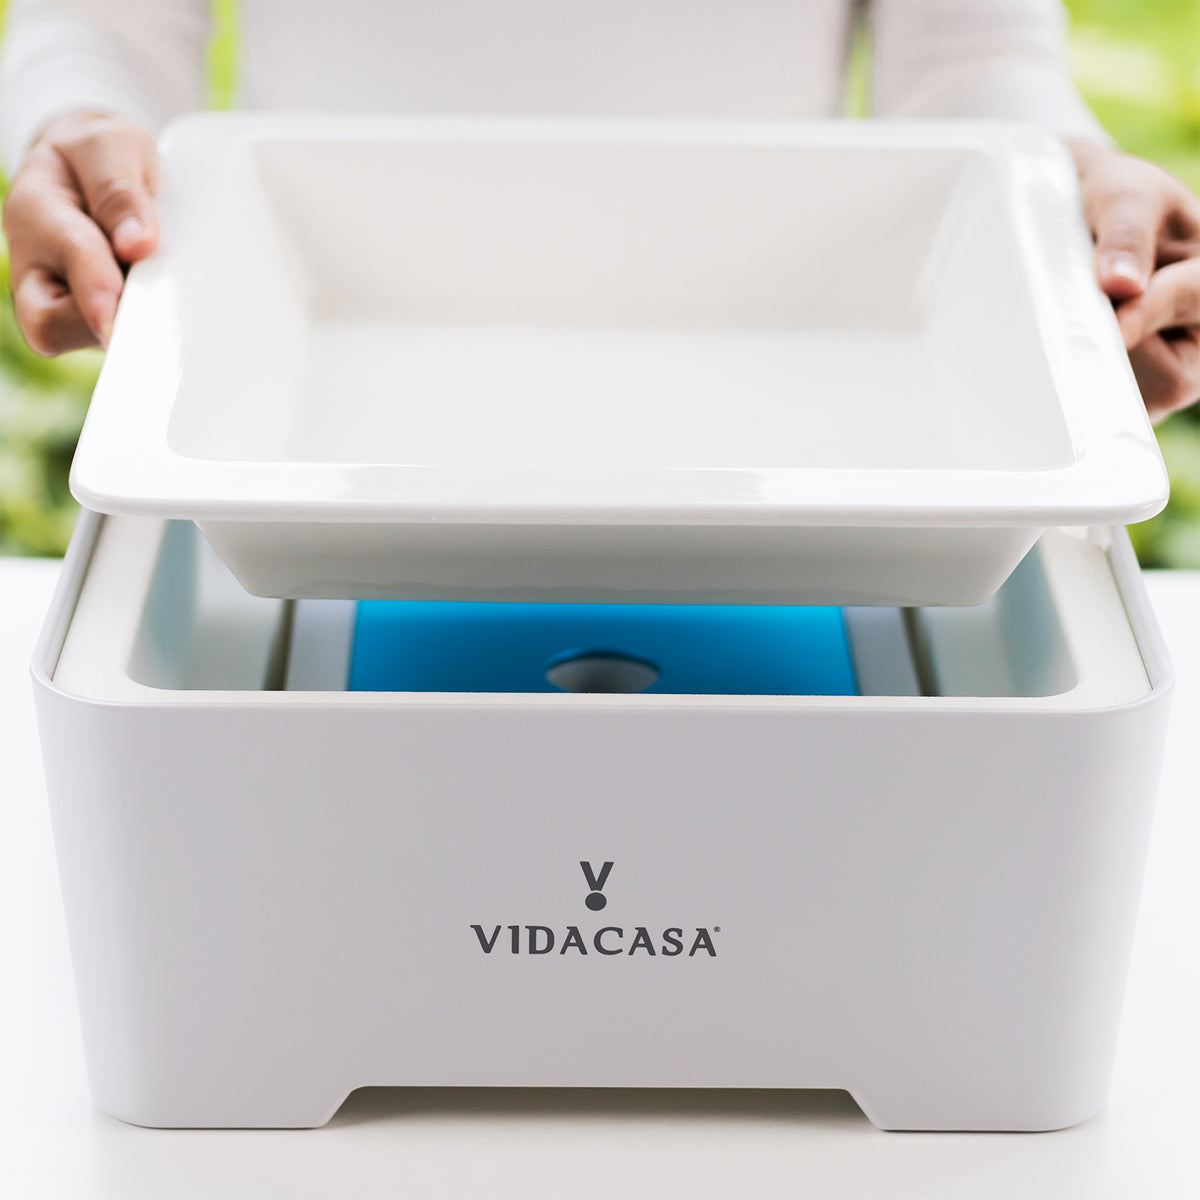 Vidacasa® Classic S305 Square is the world’s first buffetware equipment that can maintain cold foods chilled at 4ºC (39ºF) without ice; Maintain cooked foods hot at 80ºC (176ºF) for hours without dangling cords or chafing fuels.